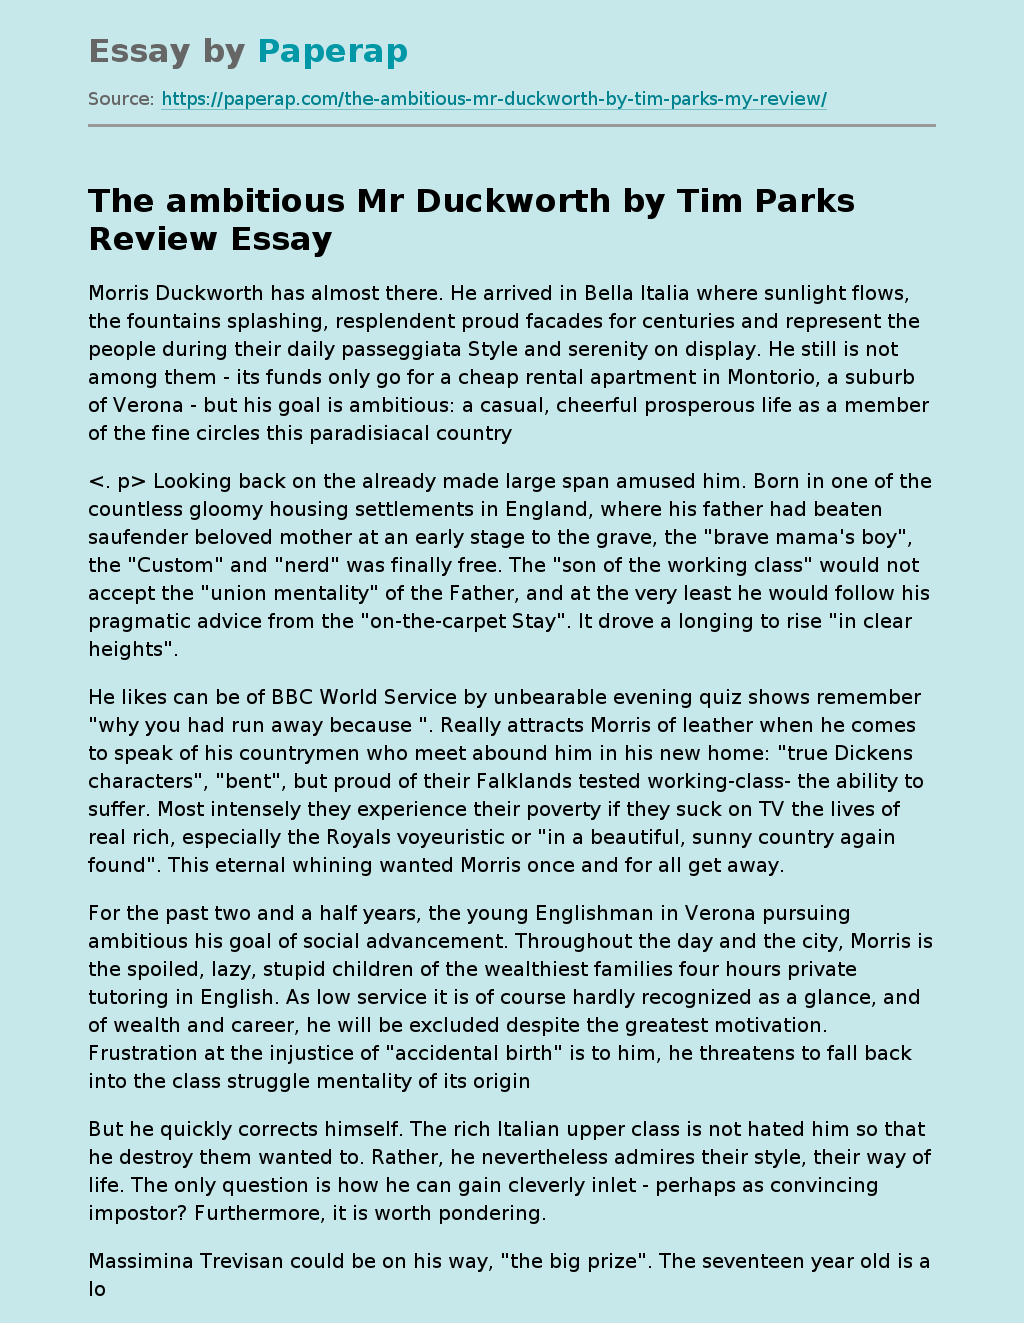 The Ambitious Mr Duckworth by Tim Parks Review